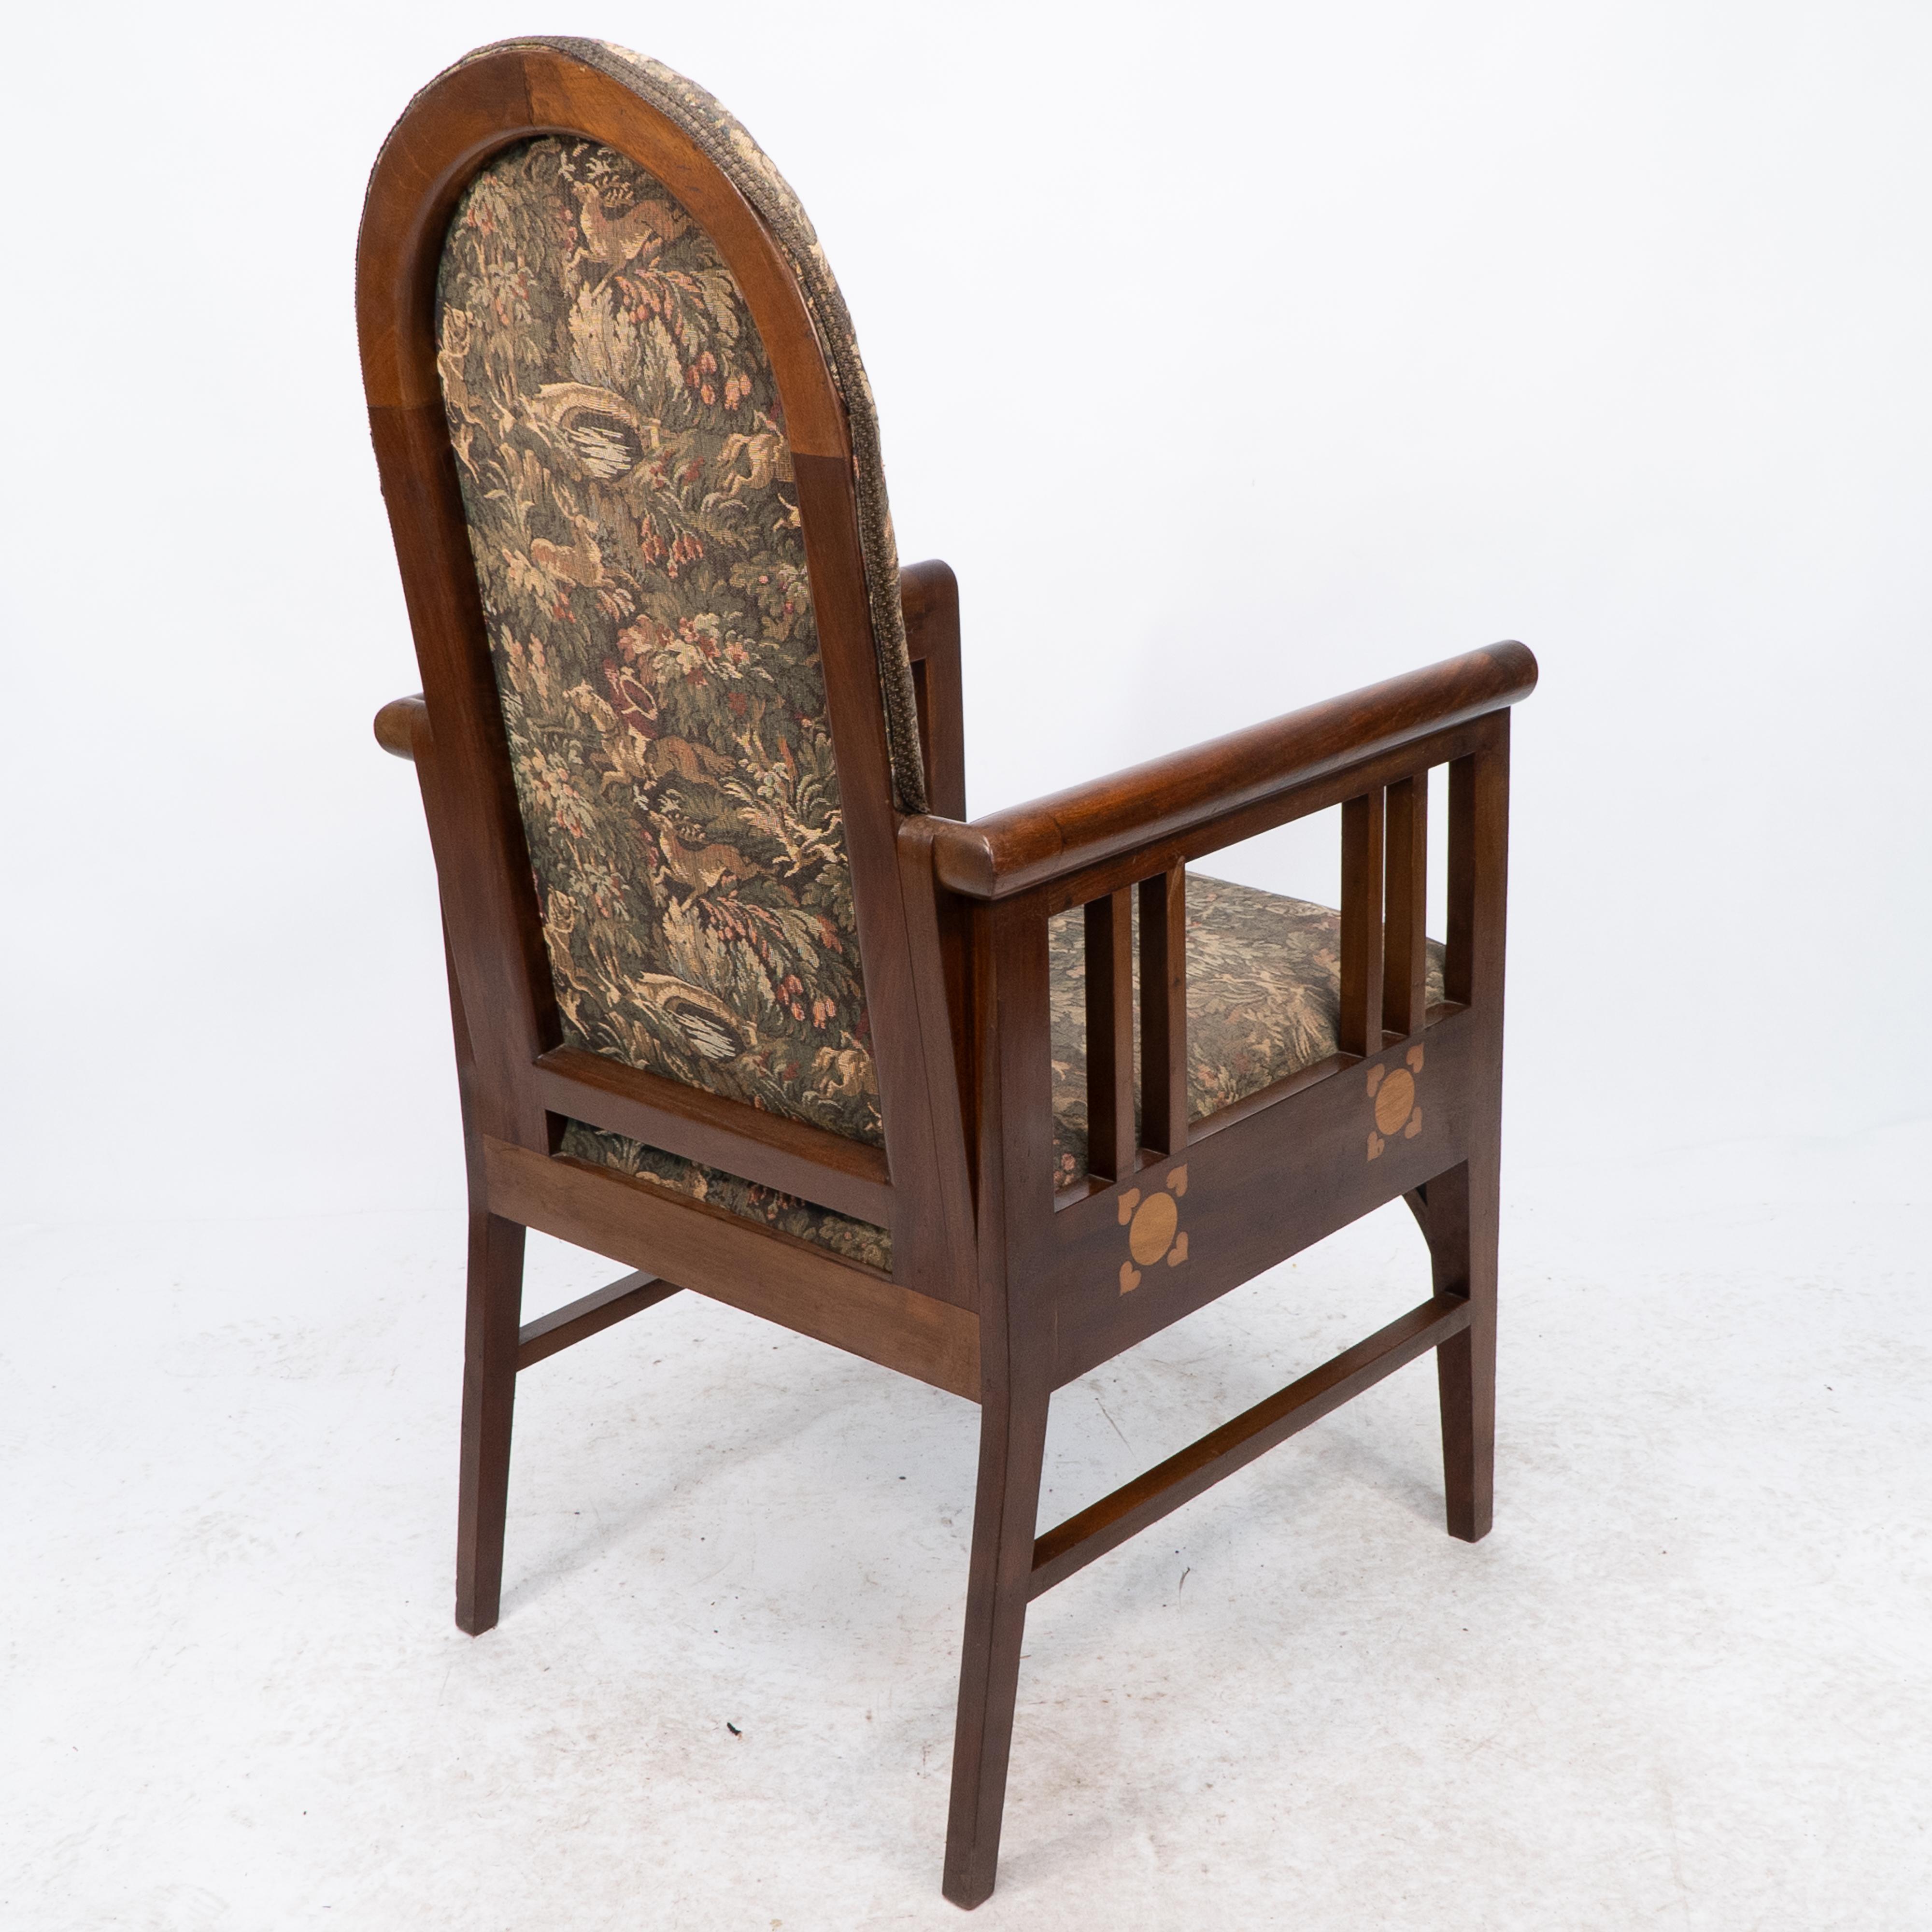 G M Ellwood for J S Henry. A Progressive New Art armchair with fruitwood inlays For Sale 10